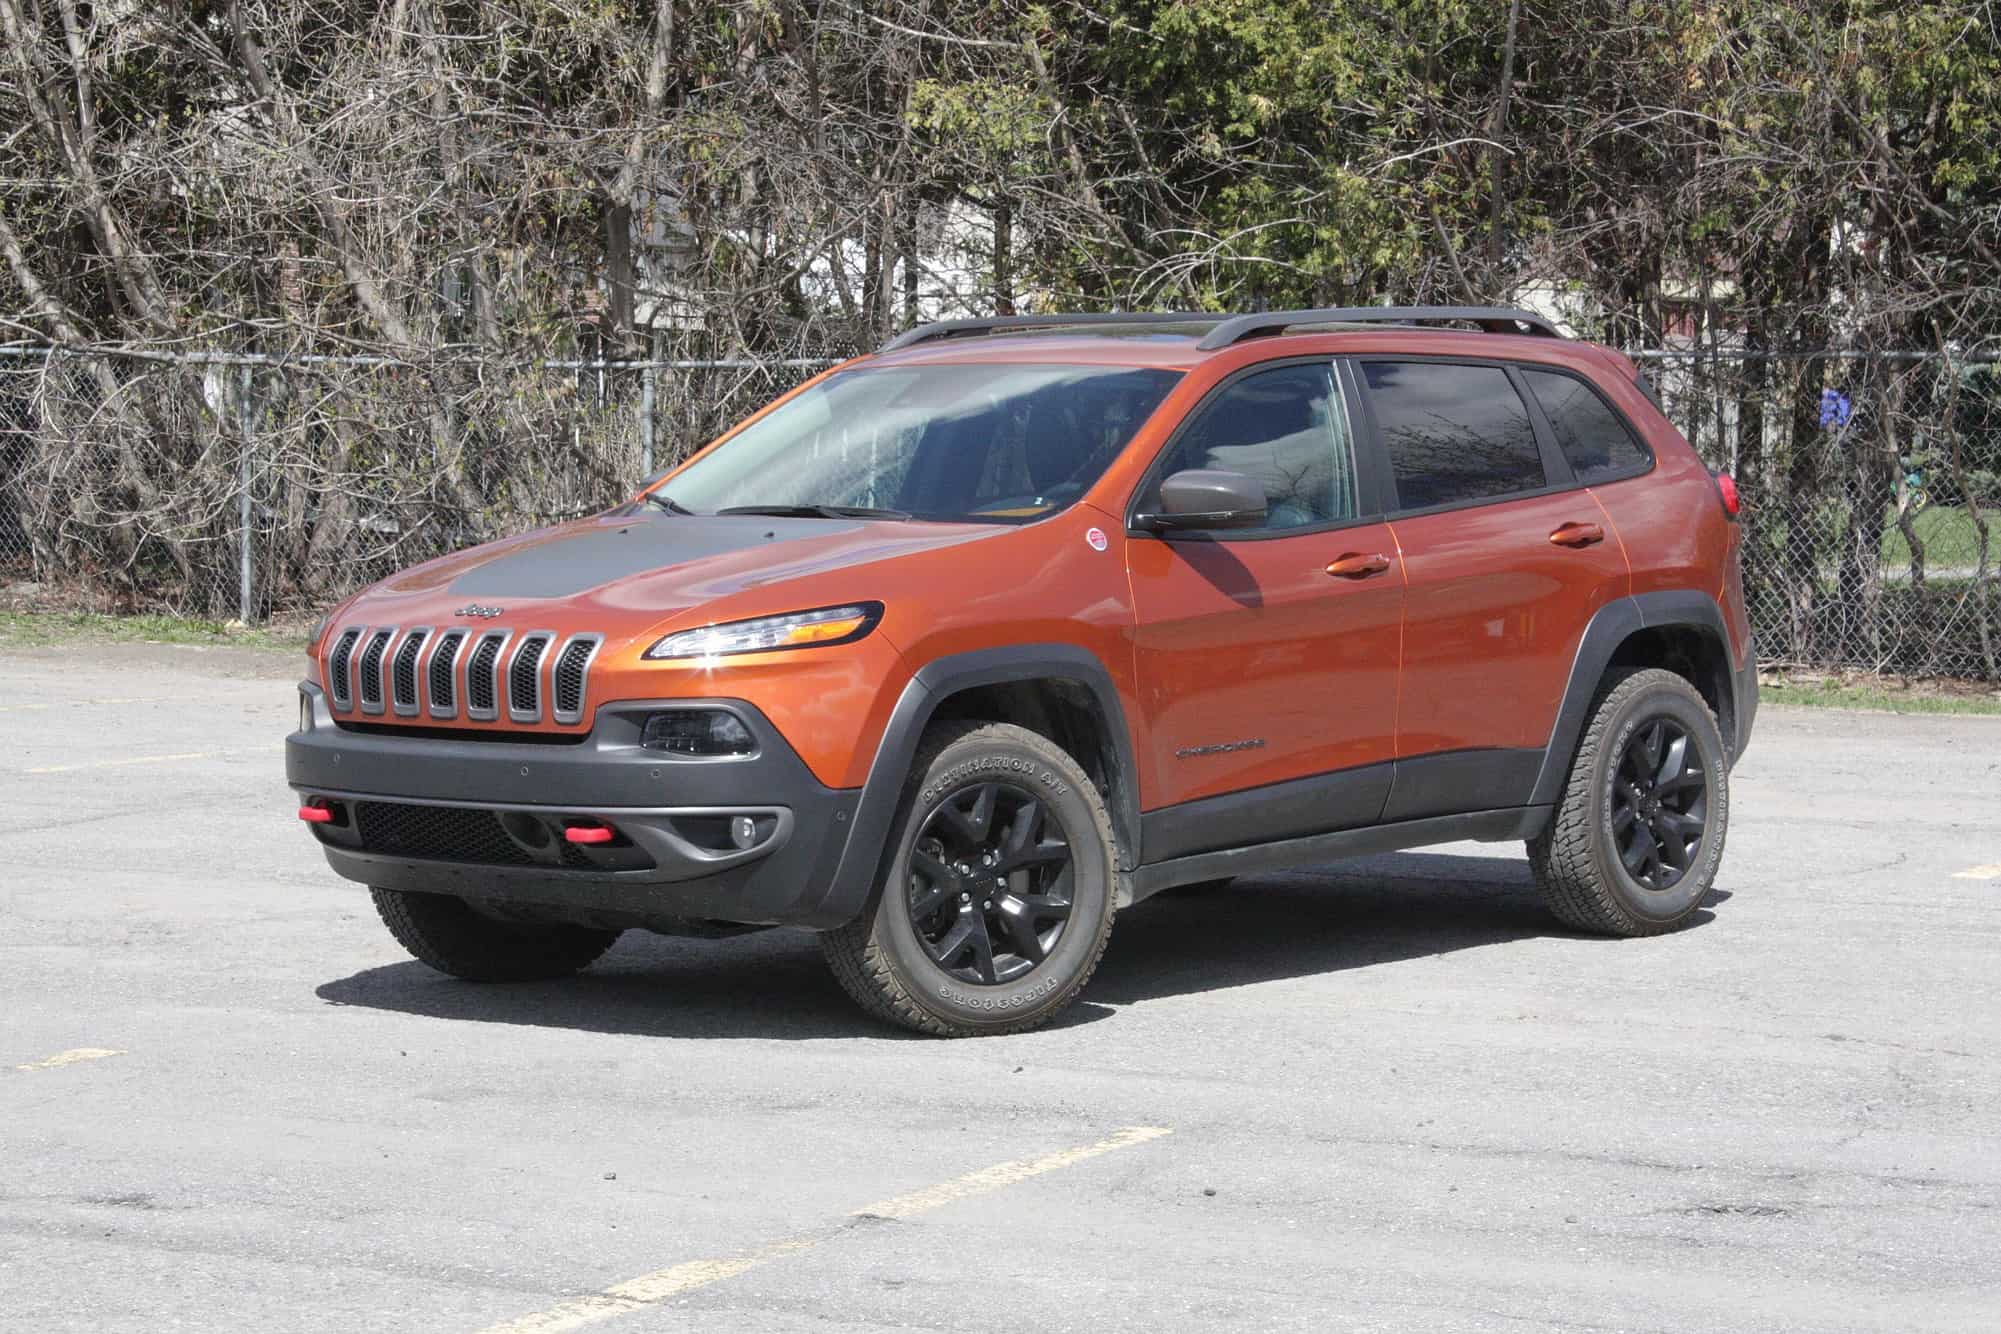 2015 Jeep Cherokee Trailhawk Review | TractionLife